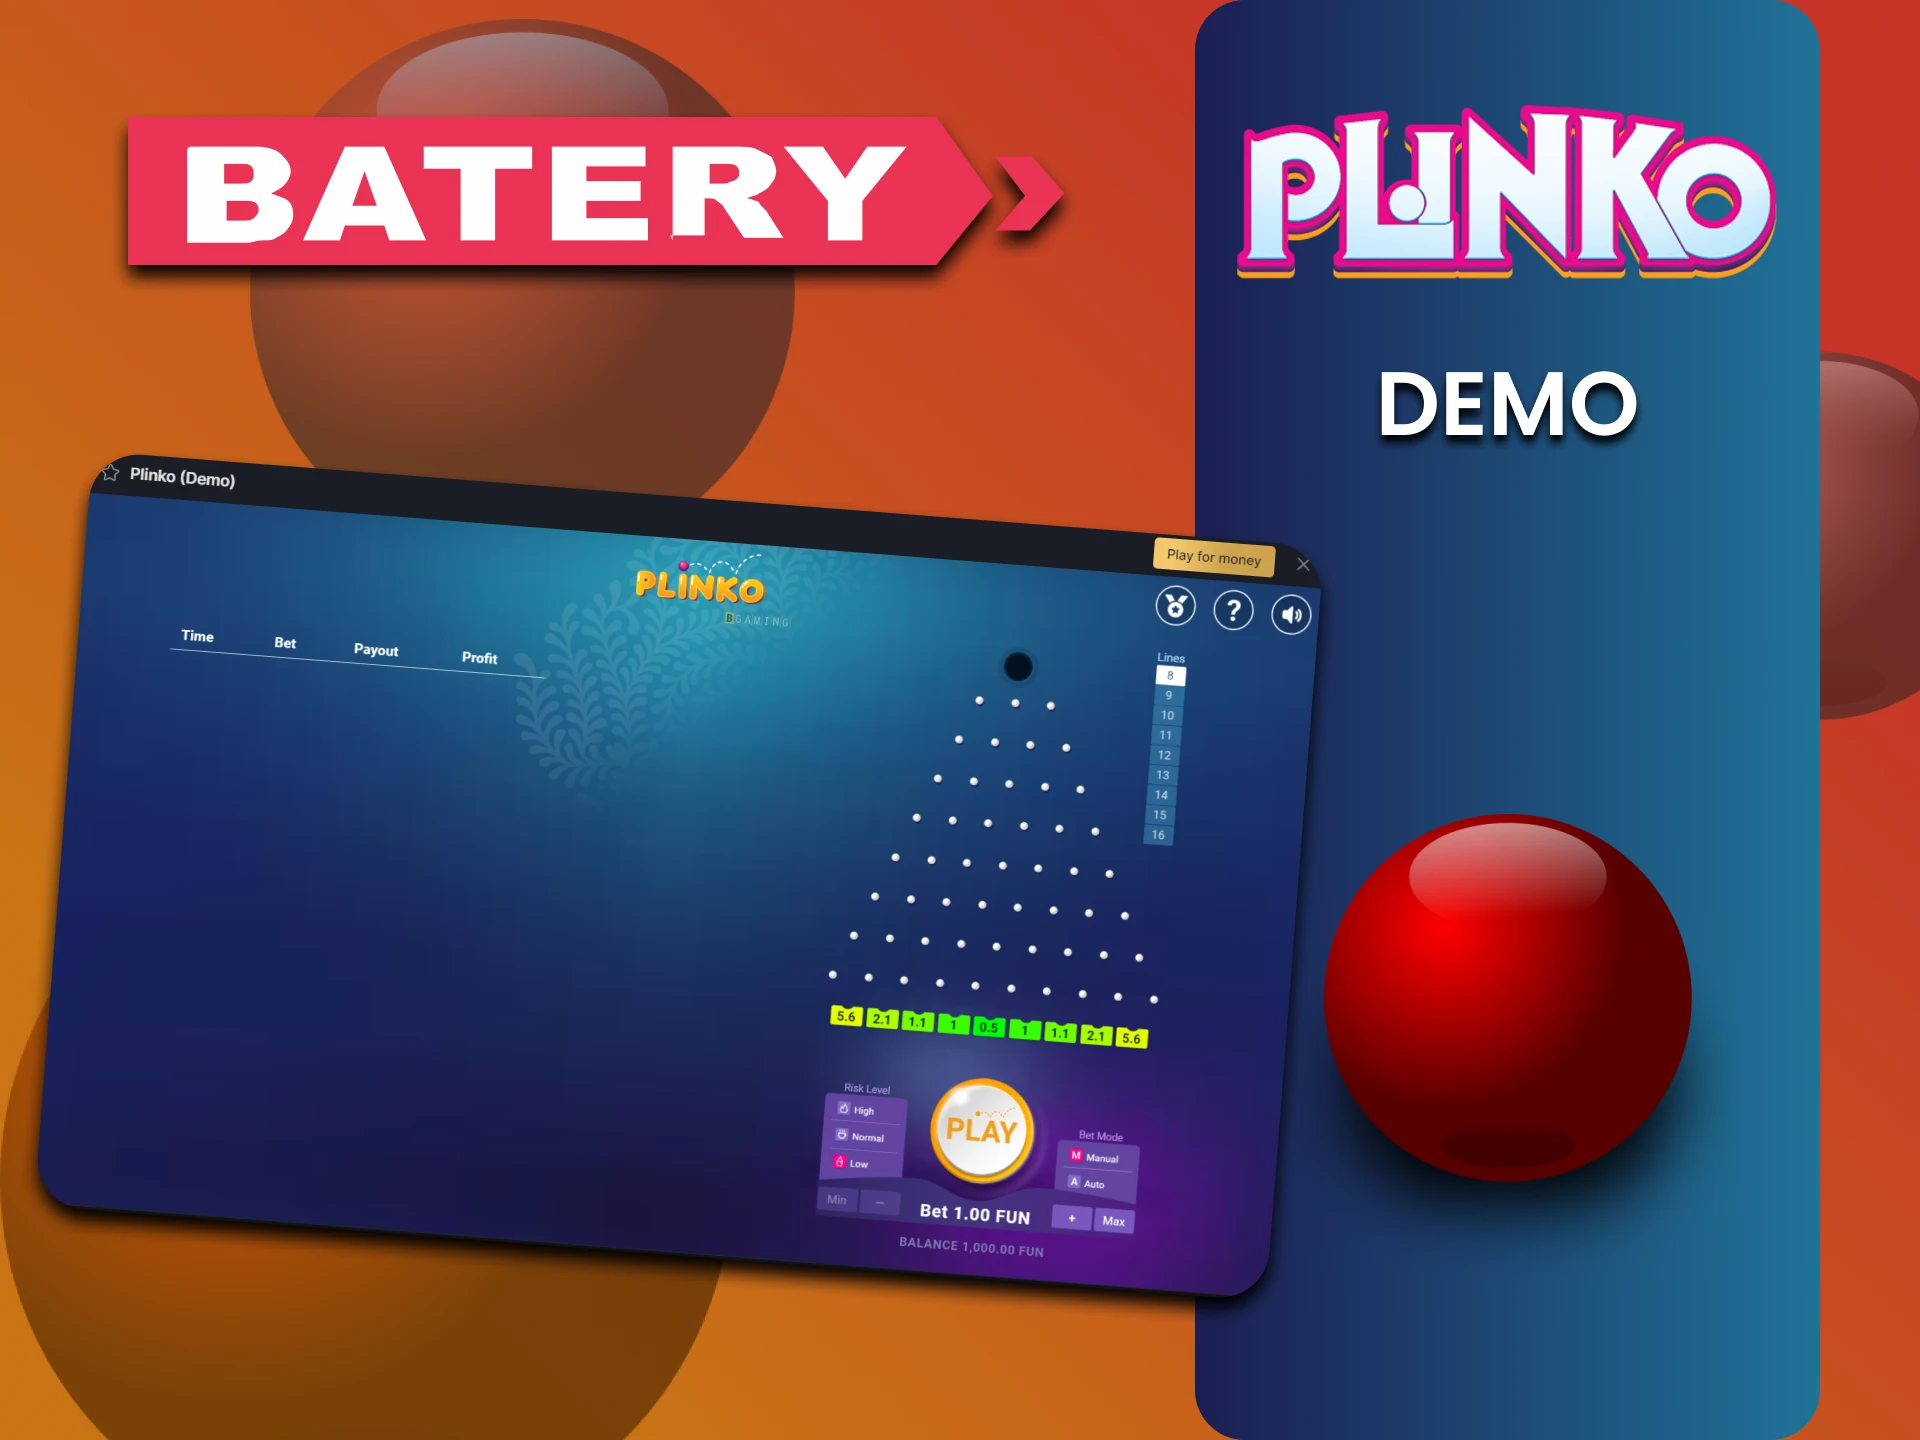 Practice with a demo version of the Plinko game on the Batery website.